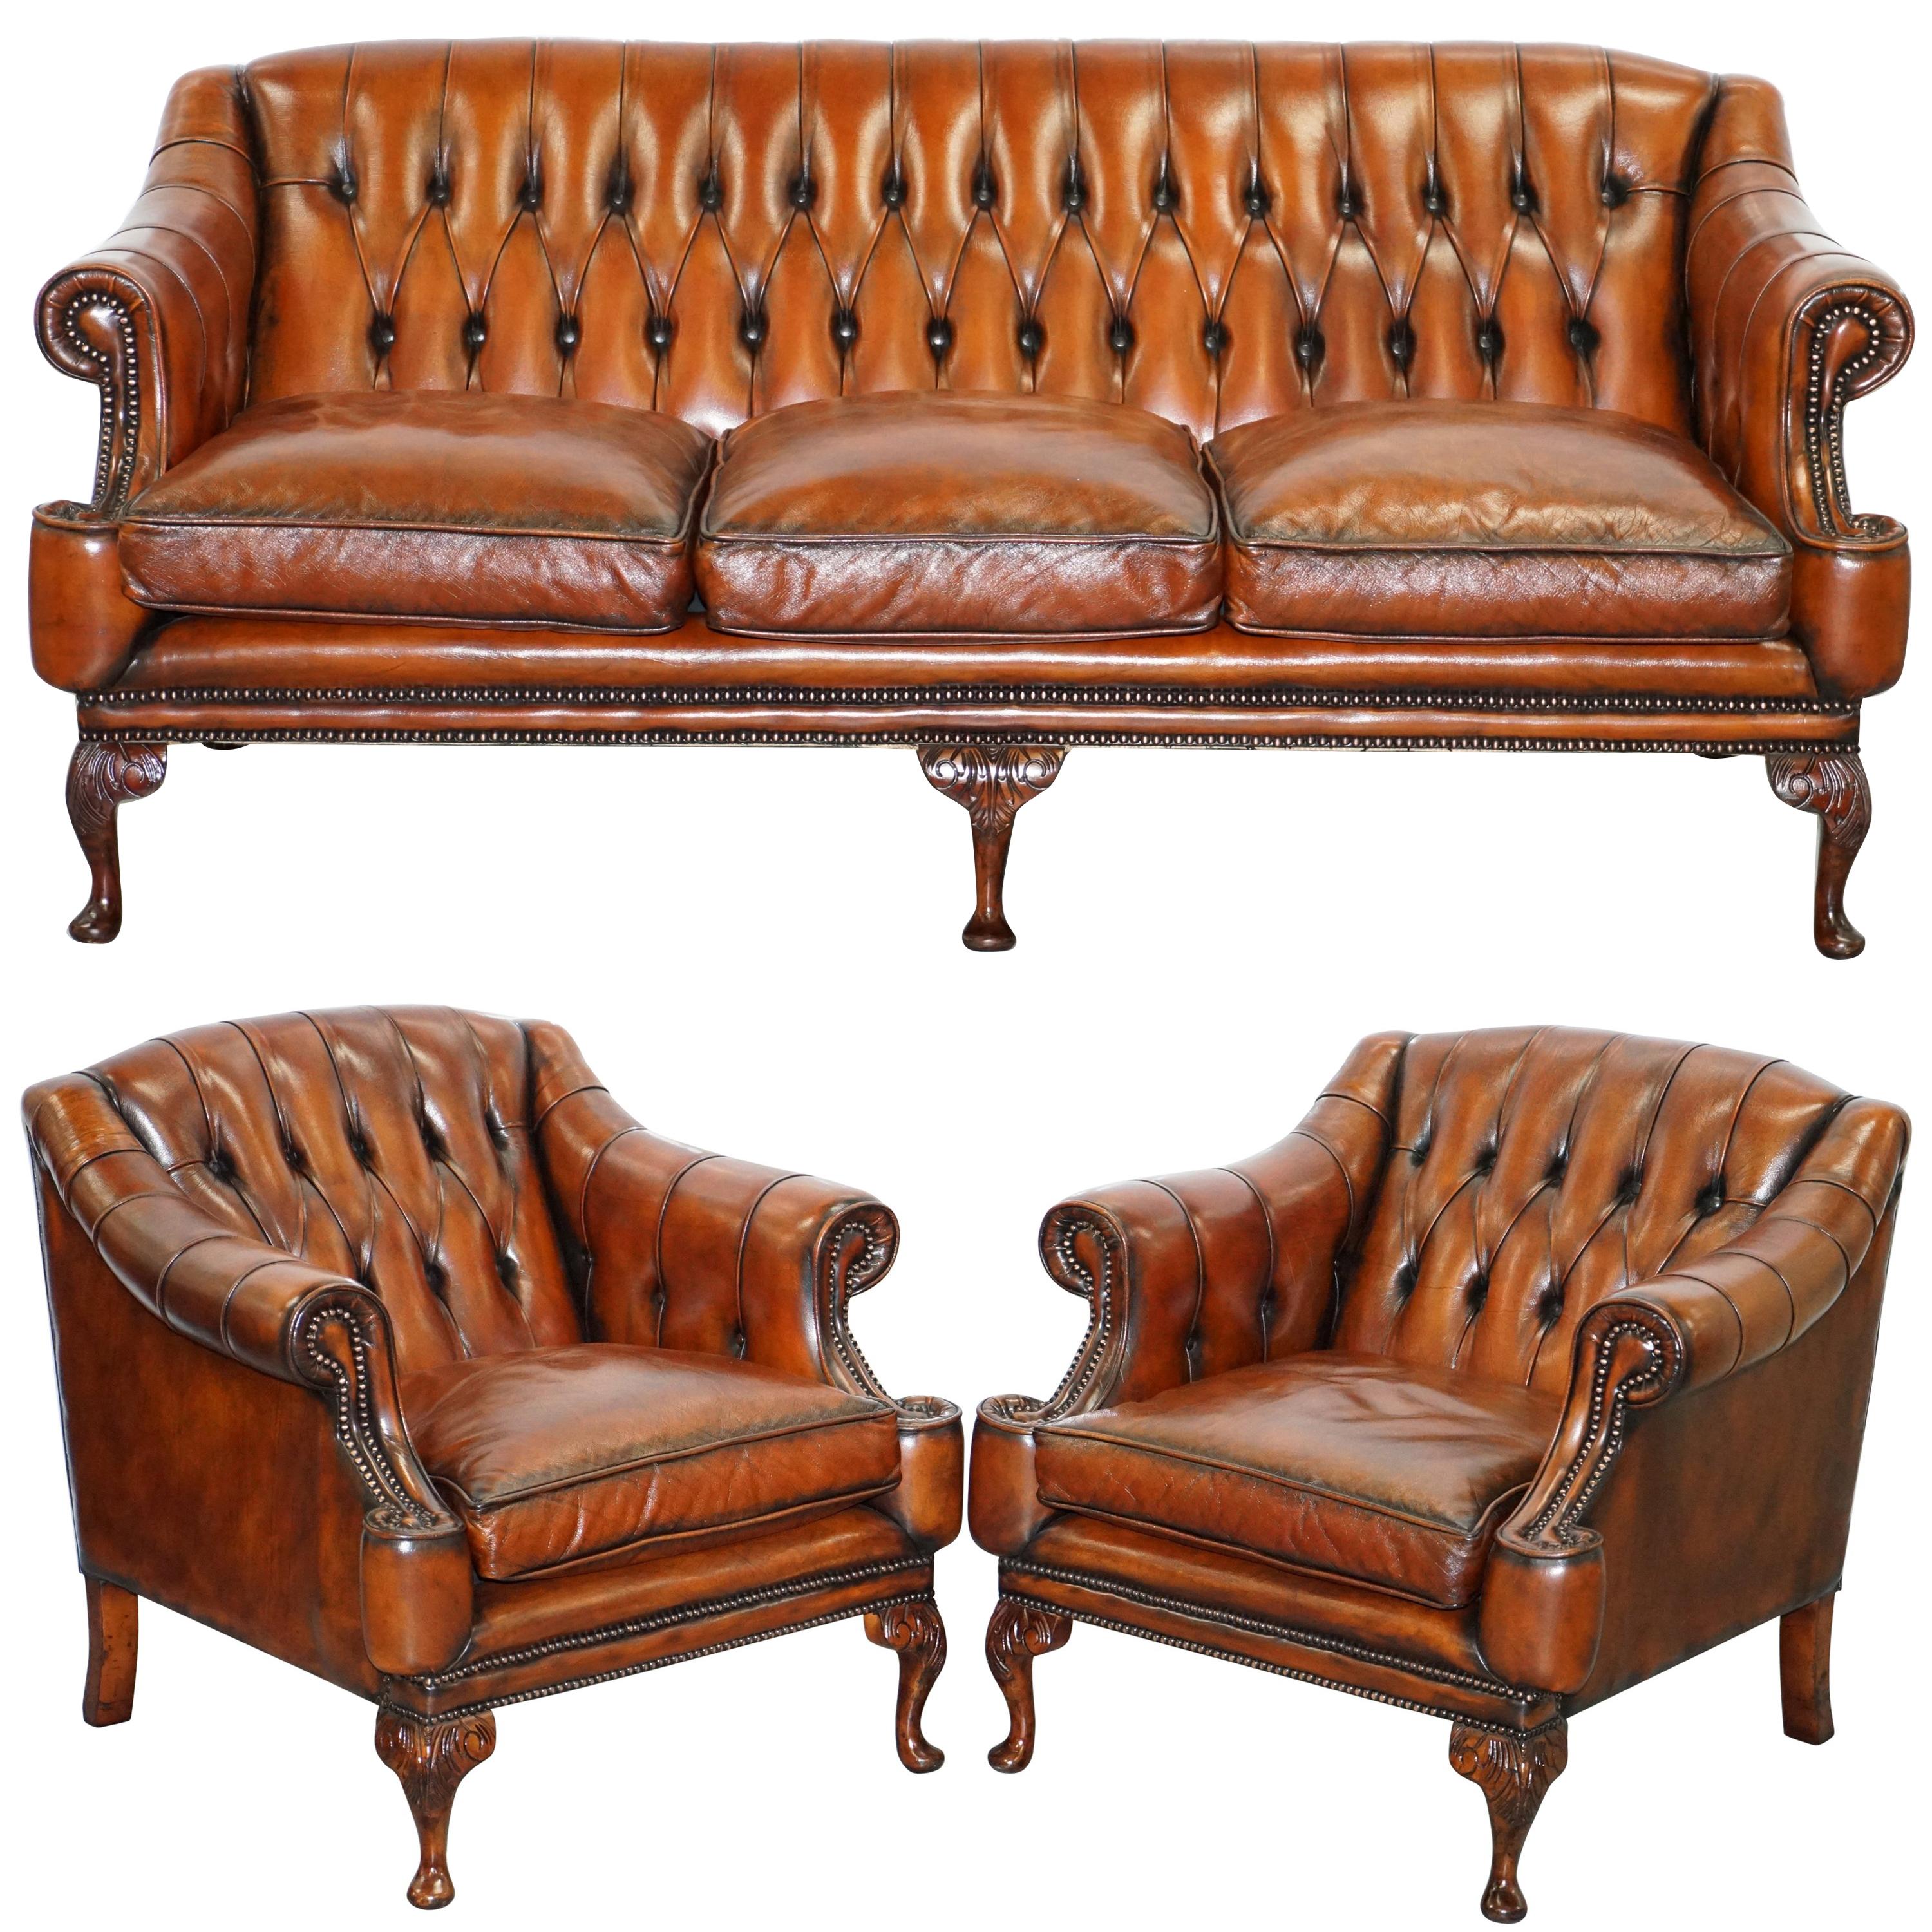 Restored Lutyen's Style Viceroy's Chesterfield Brown Leather Sofa and Armchairs